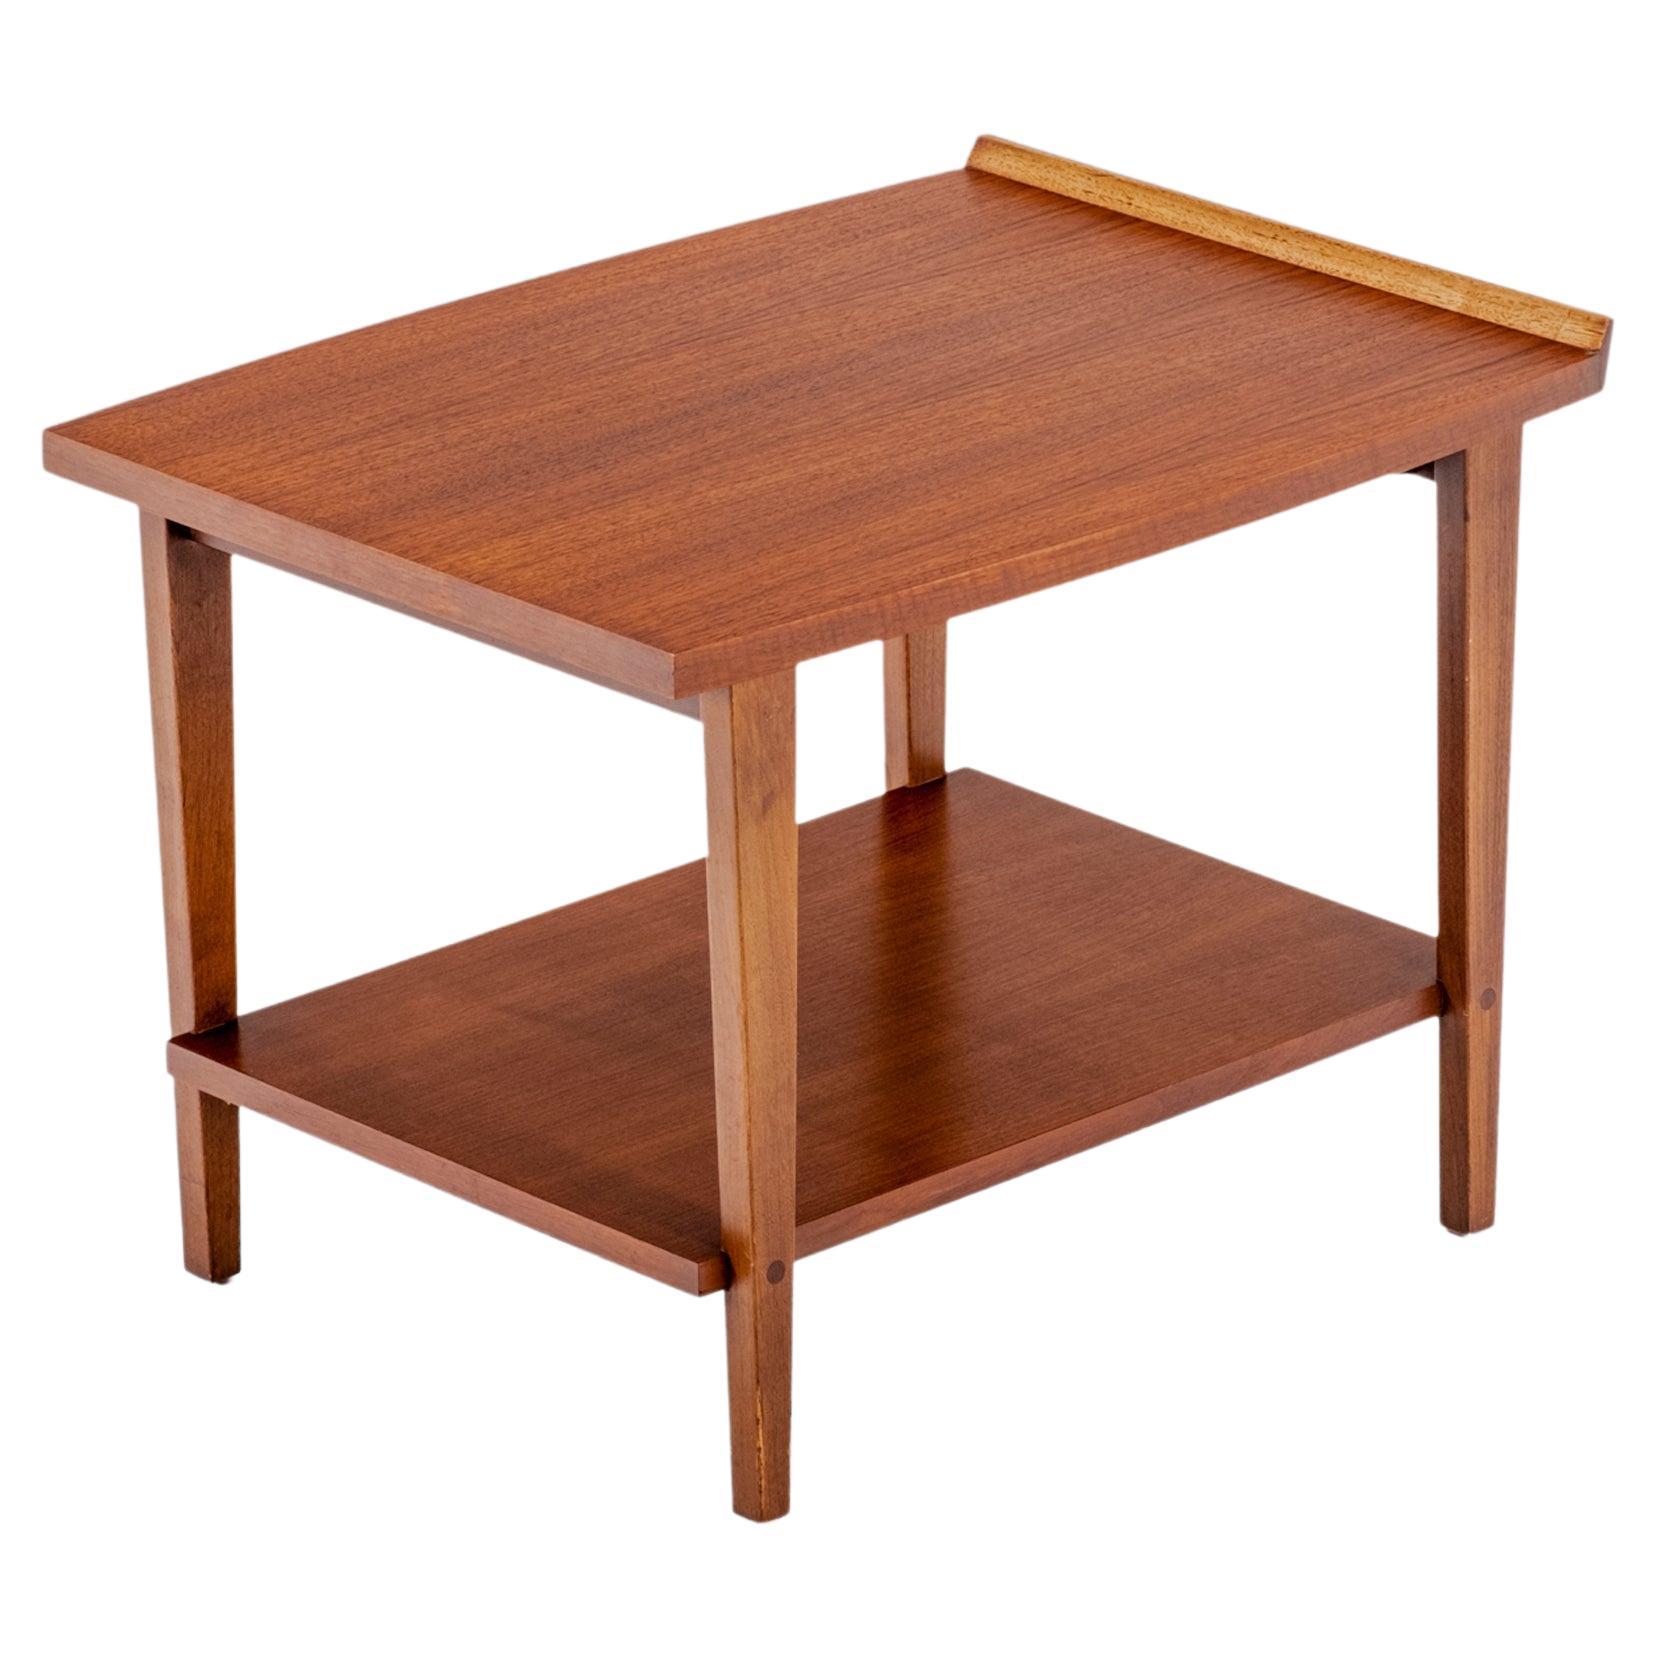 Mid-Century Modern Two Tiered End Table / Side Table by Lane, USA, C. 1960's For Sale